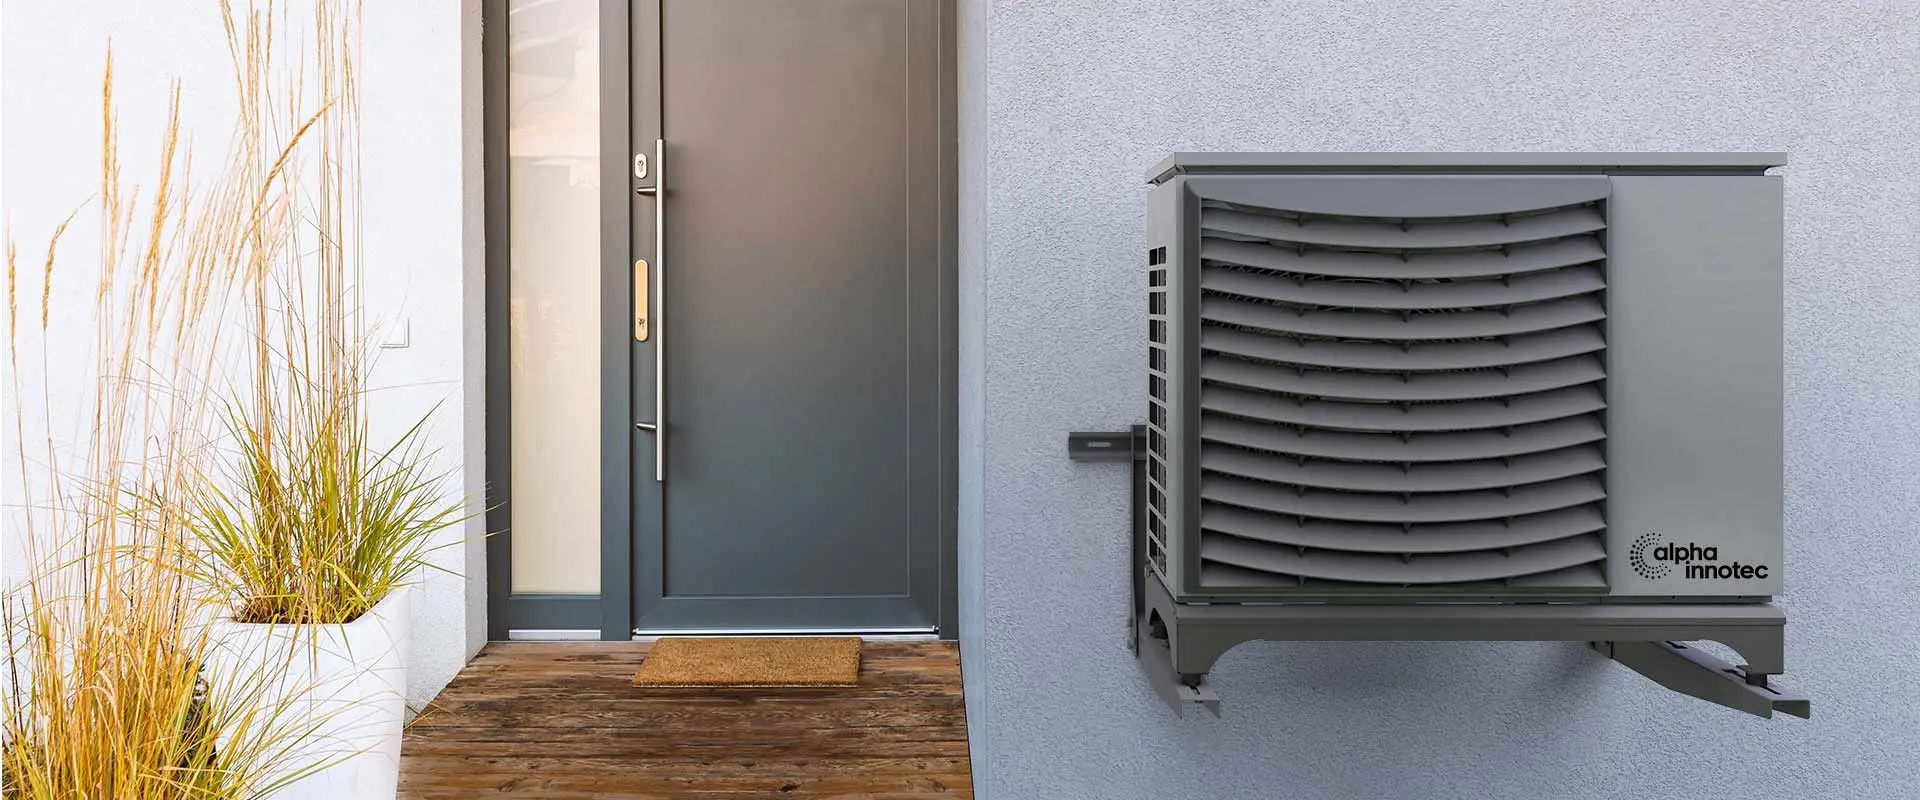 The heat pump Jersey is installed on a house wall and right next to the front door. On the left side of the door there are planted grasses.